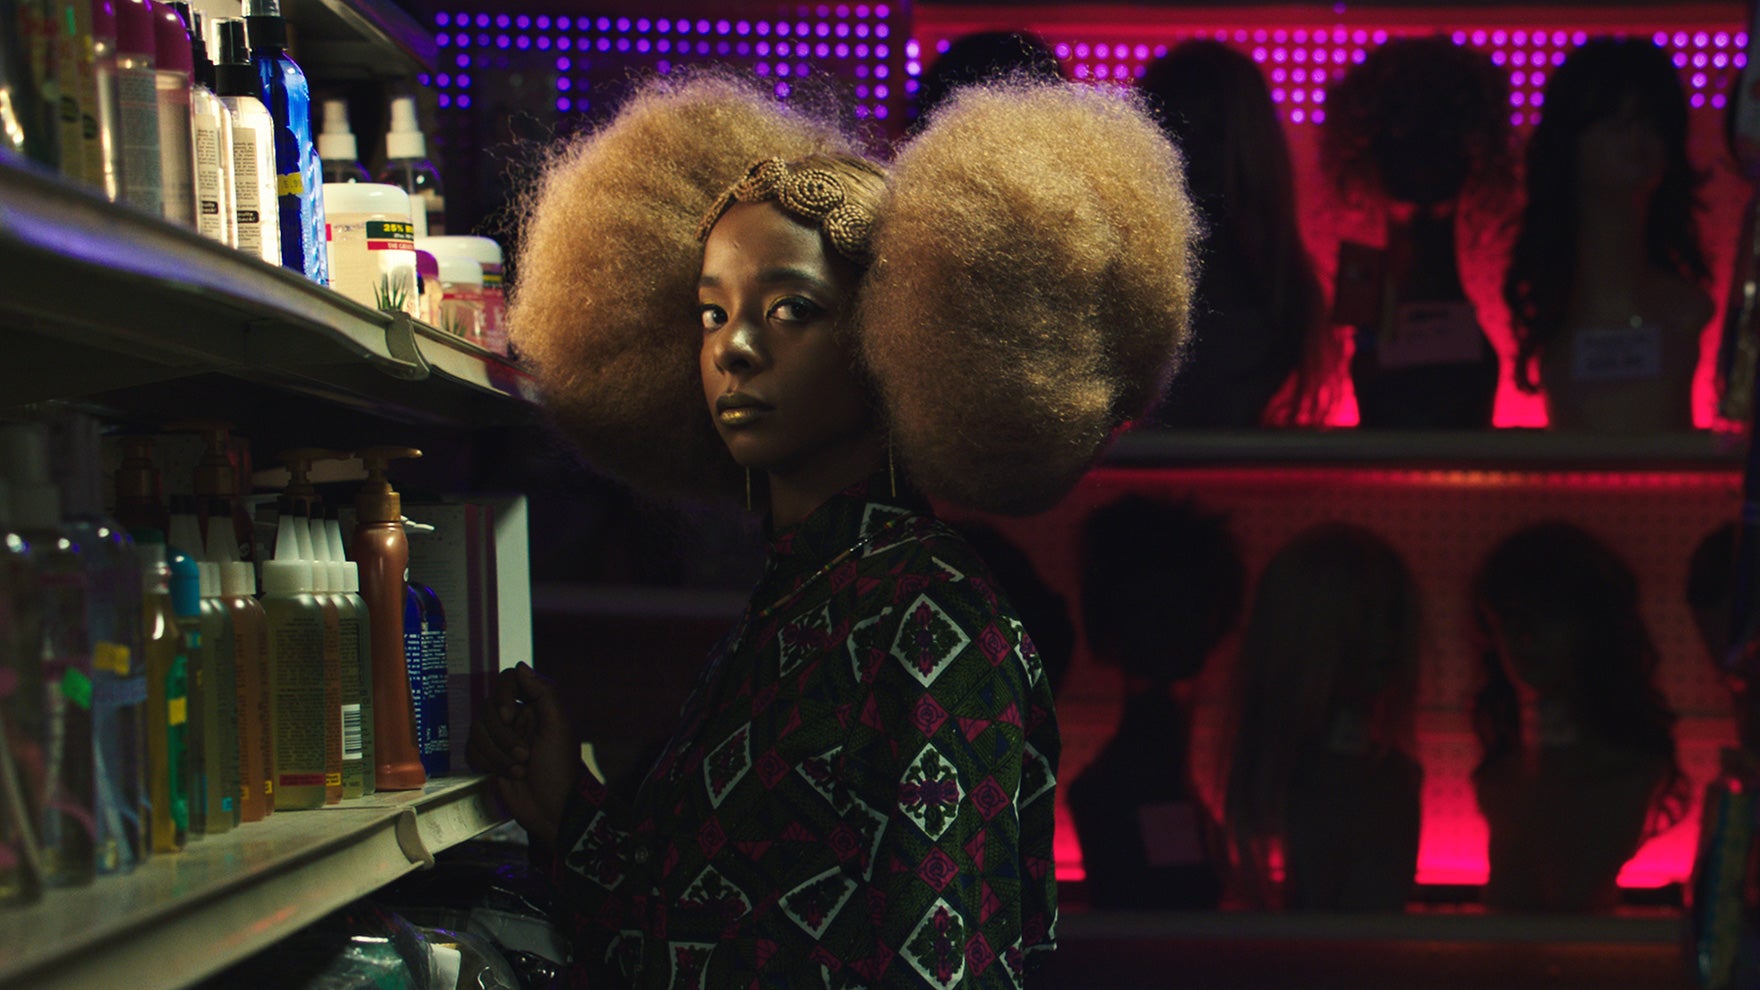 25 Black Films And Shorts We're Excited To See At Sundance 2018
